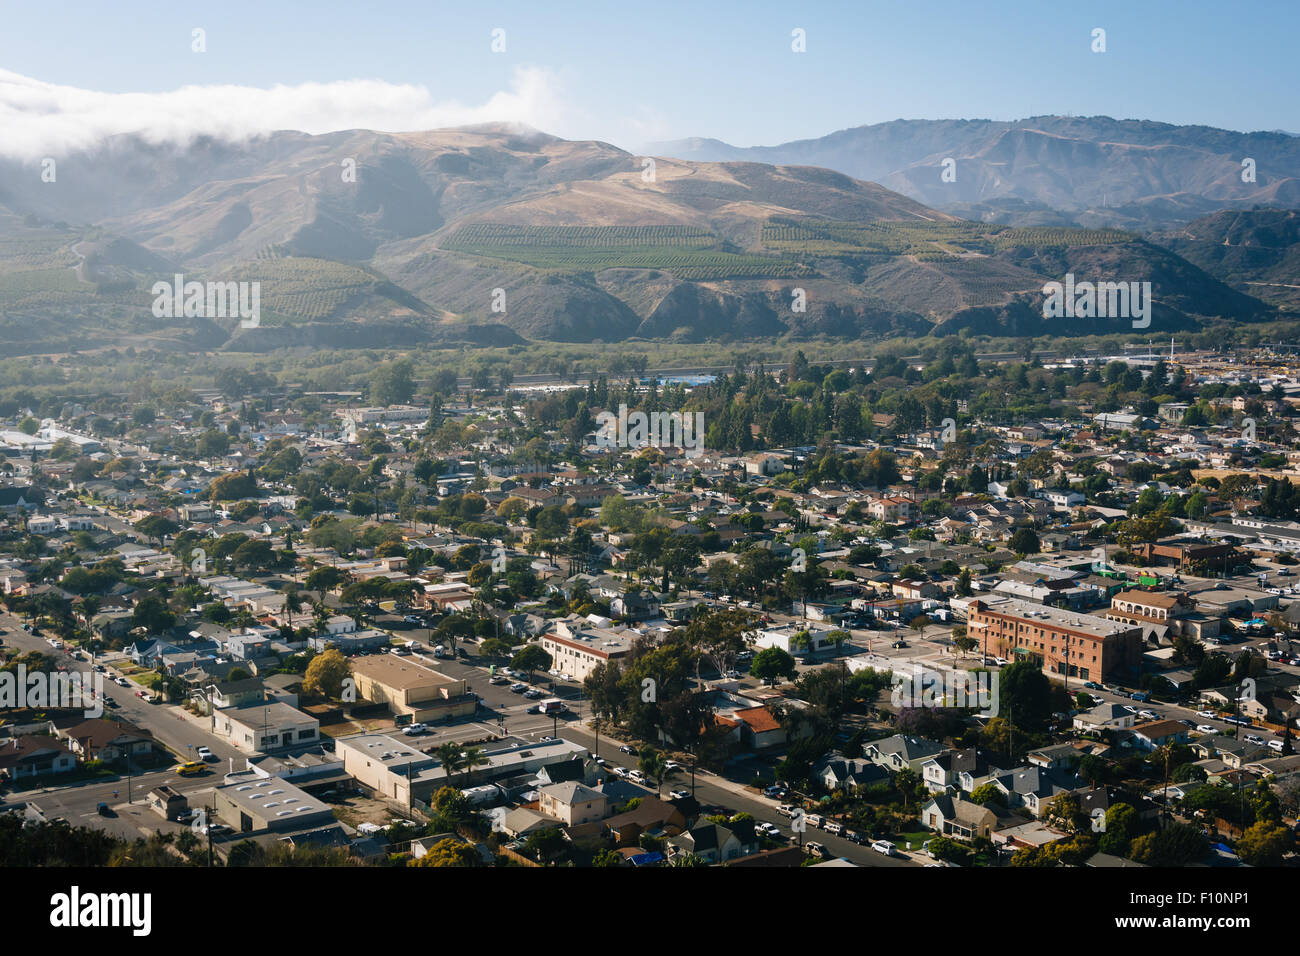 View of Ventura and distant mountains from Grant Park, in Ventura, California. Stock Photo